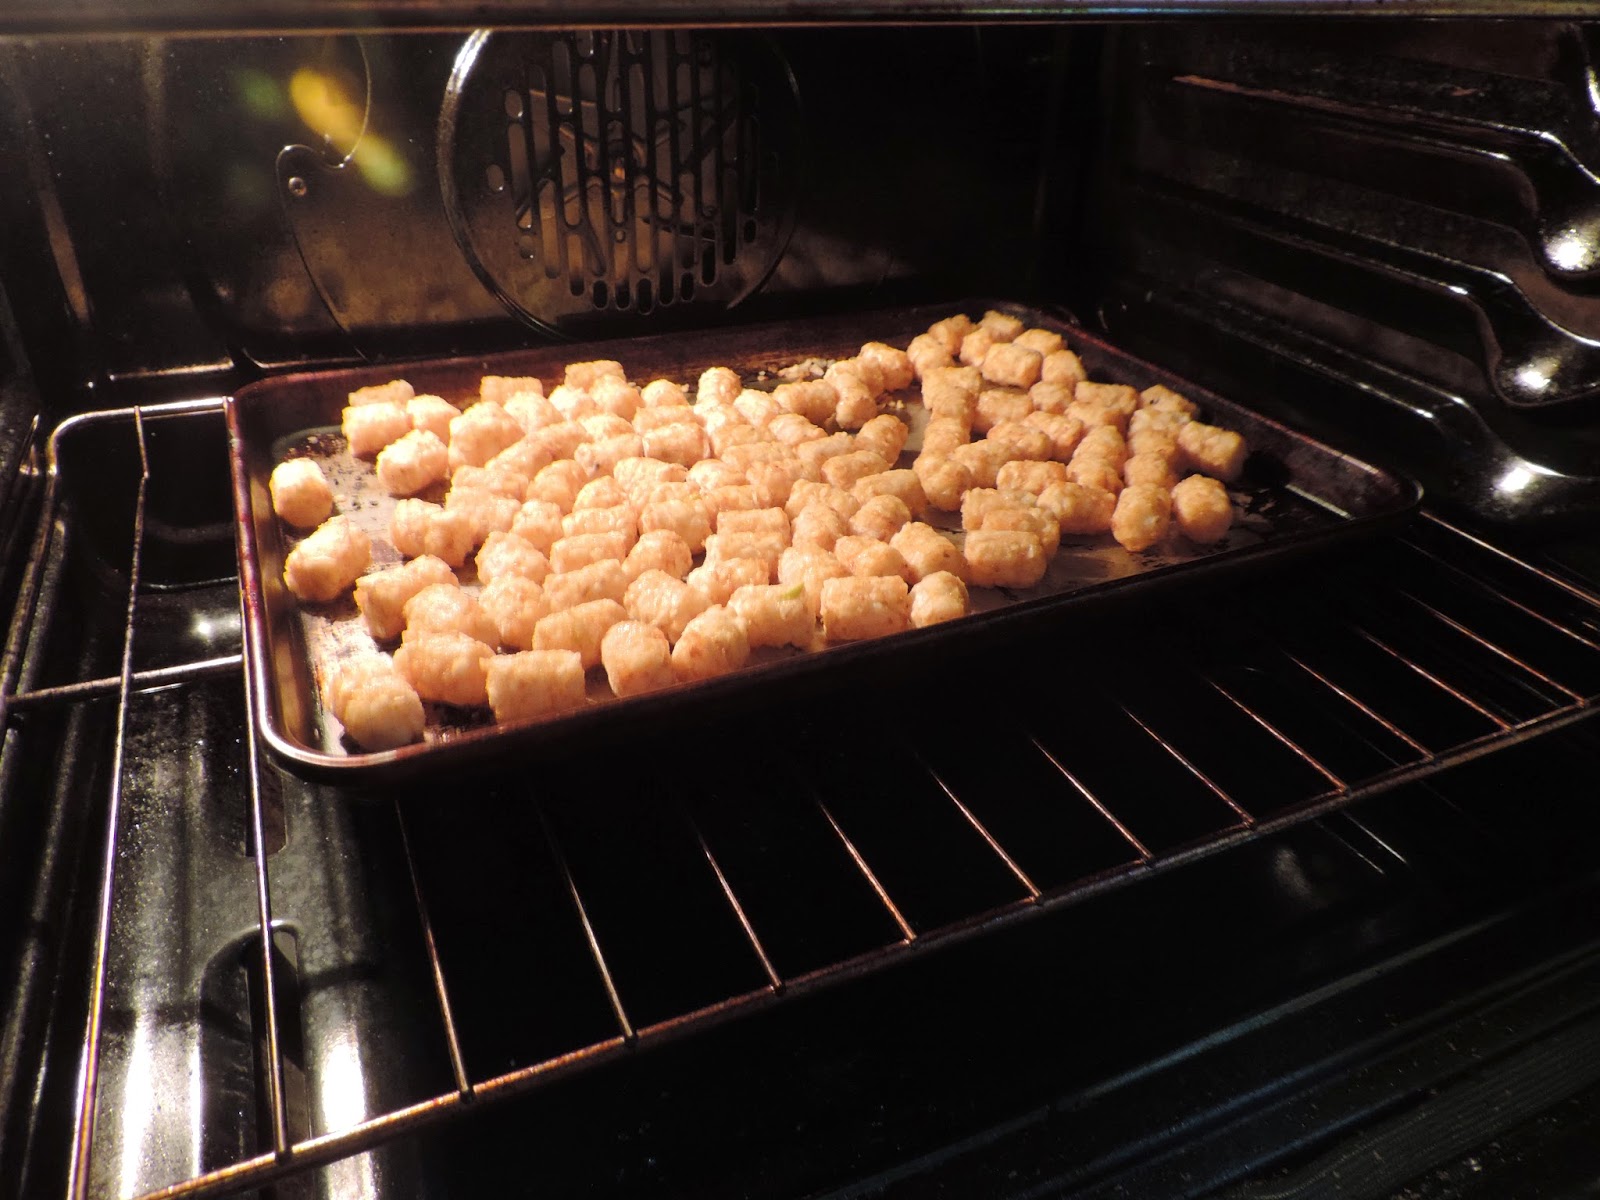 Tater tots cooking in the oven. 